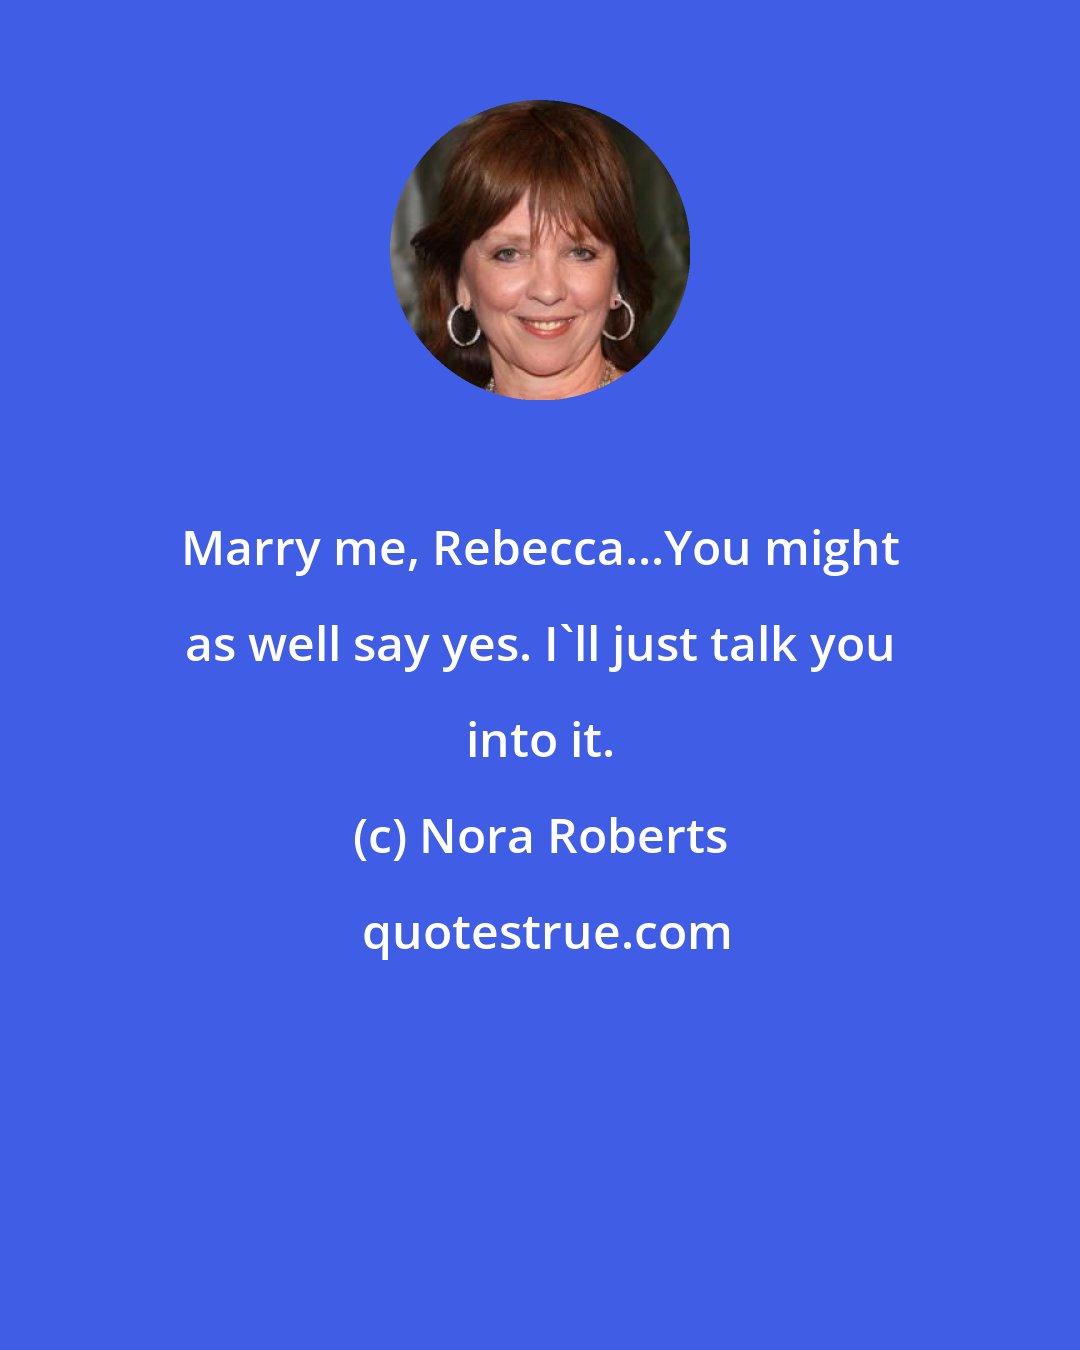 Nora Roberts: Marry me, Rebecca...You might as well say yes. I'll just talk you into it.